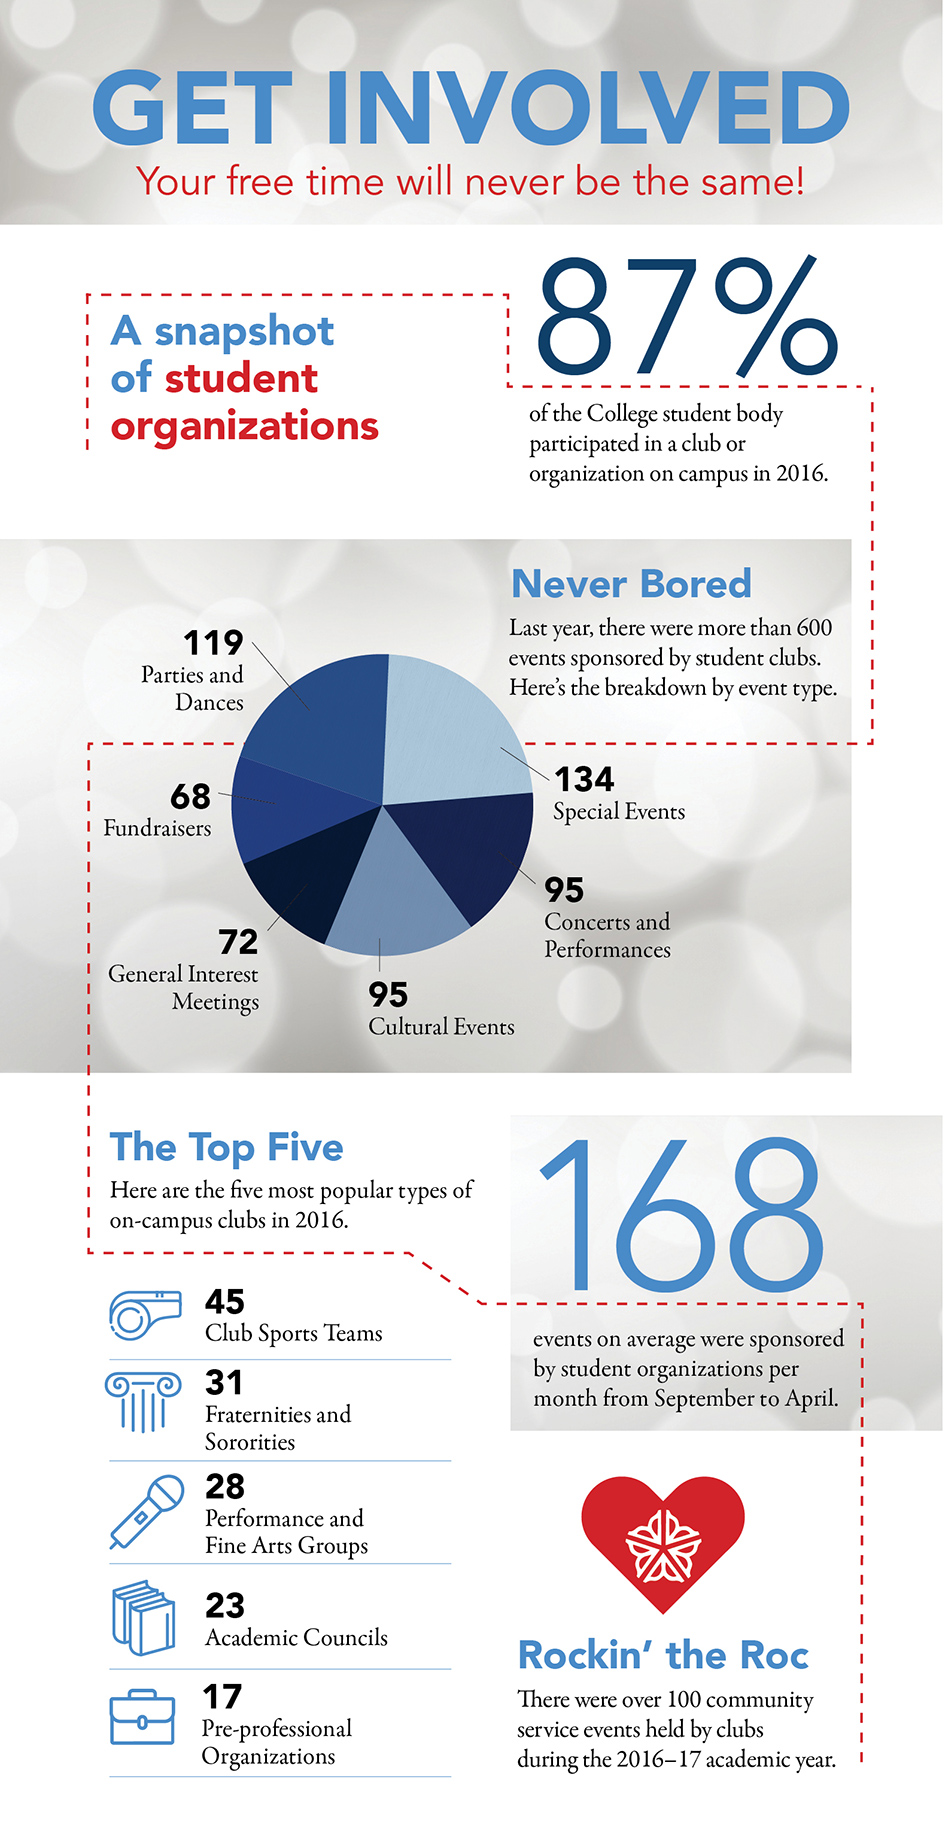 Infographic reads: Get Involved! Your free time will never be the same. A snapshot of student organizations. 87% of College student body participated in a club or organization in 2016. Last year, there were more than 600 events sponsored by student clubs. 199 parties and dances, 135 special events, 95 concerts and performances, 95 cultural events, 72 general interest meetings, and 68 fundraisers. Here are the five most popular types of on-campus clubs in 2016: 45 club sports teams, 31 fraternities and sororities, 28 performance groups, 23 academic councils, 17 pre-professional organizations. 168 events on average were sponsored by student organizations per month. There were over 100 community service events held by clubs during the 2016-17 academic year.